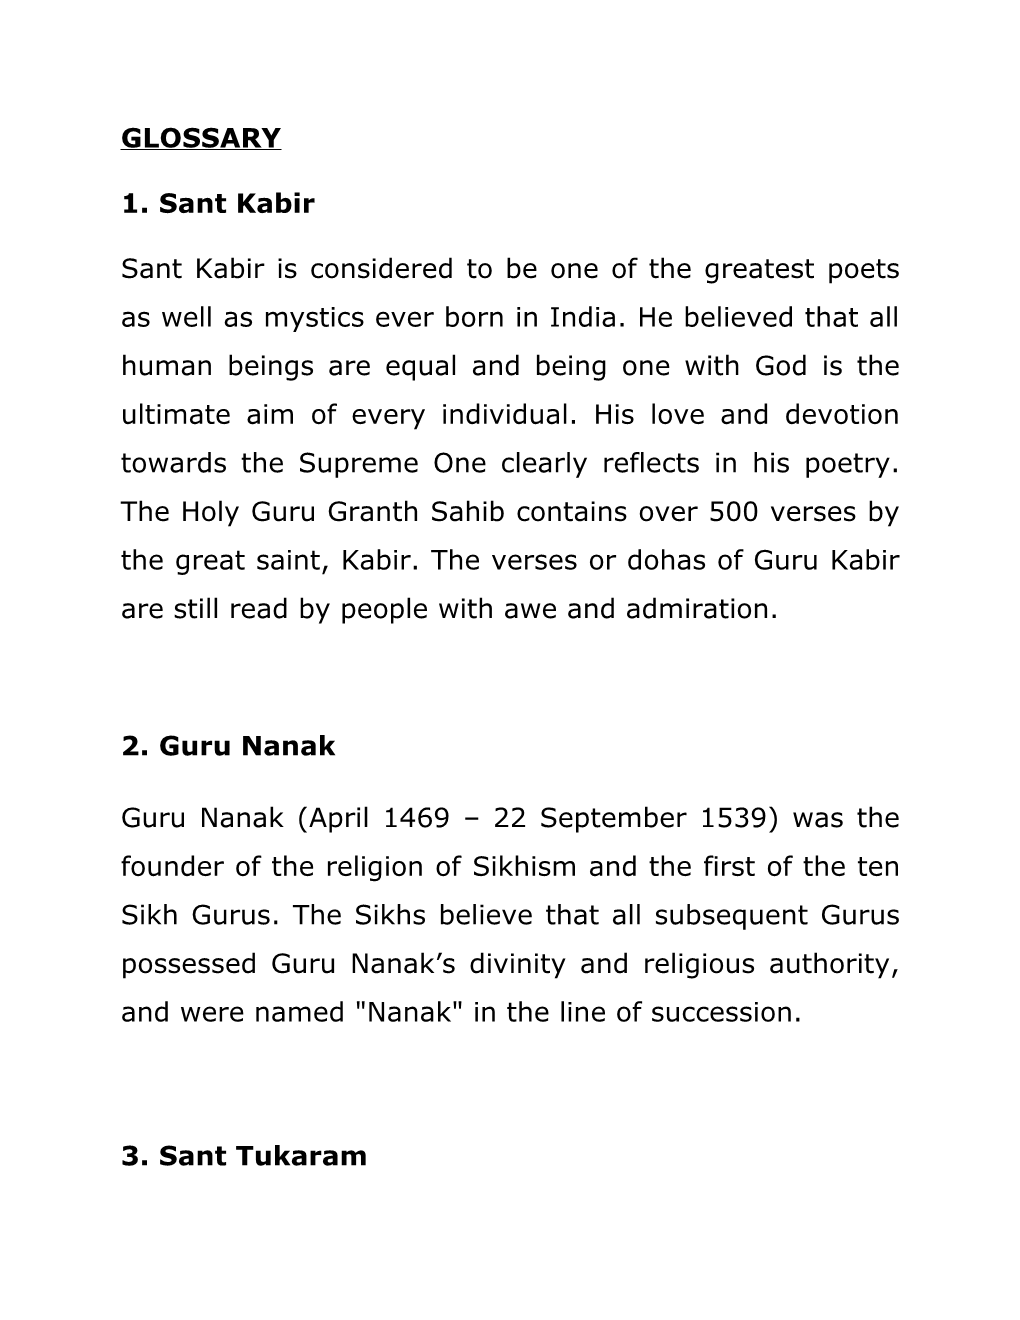 Sant Kabir Is Considered to Be One of the Greatest Poets As Well As Mystics Ever Born In